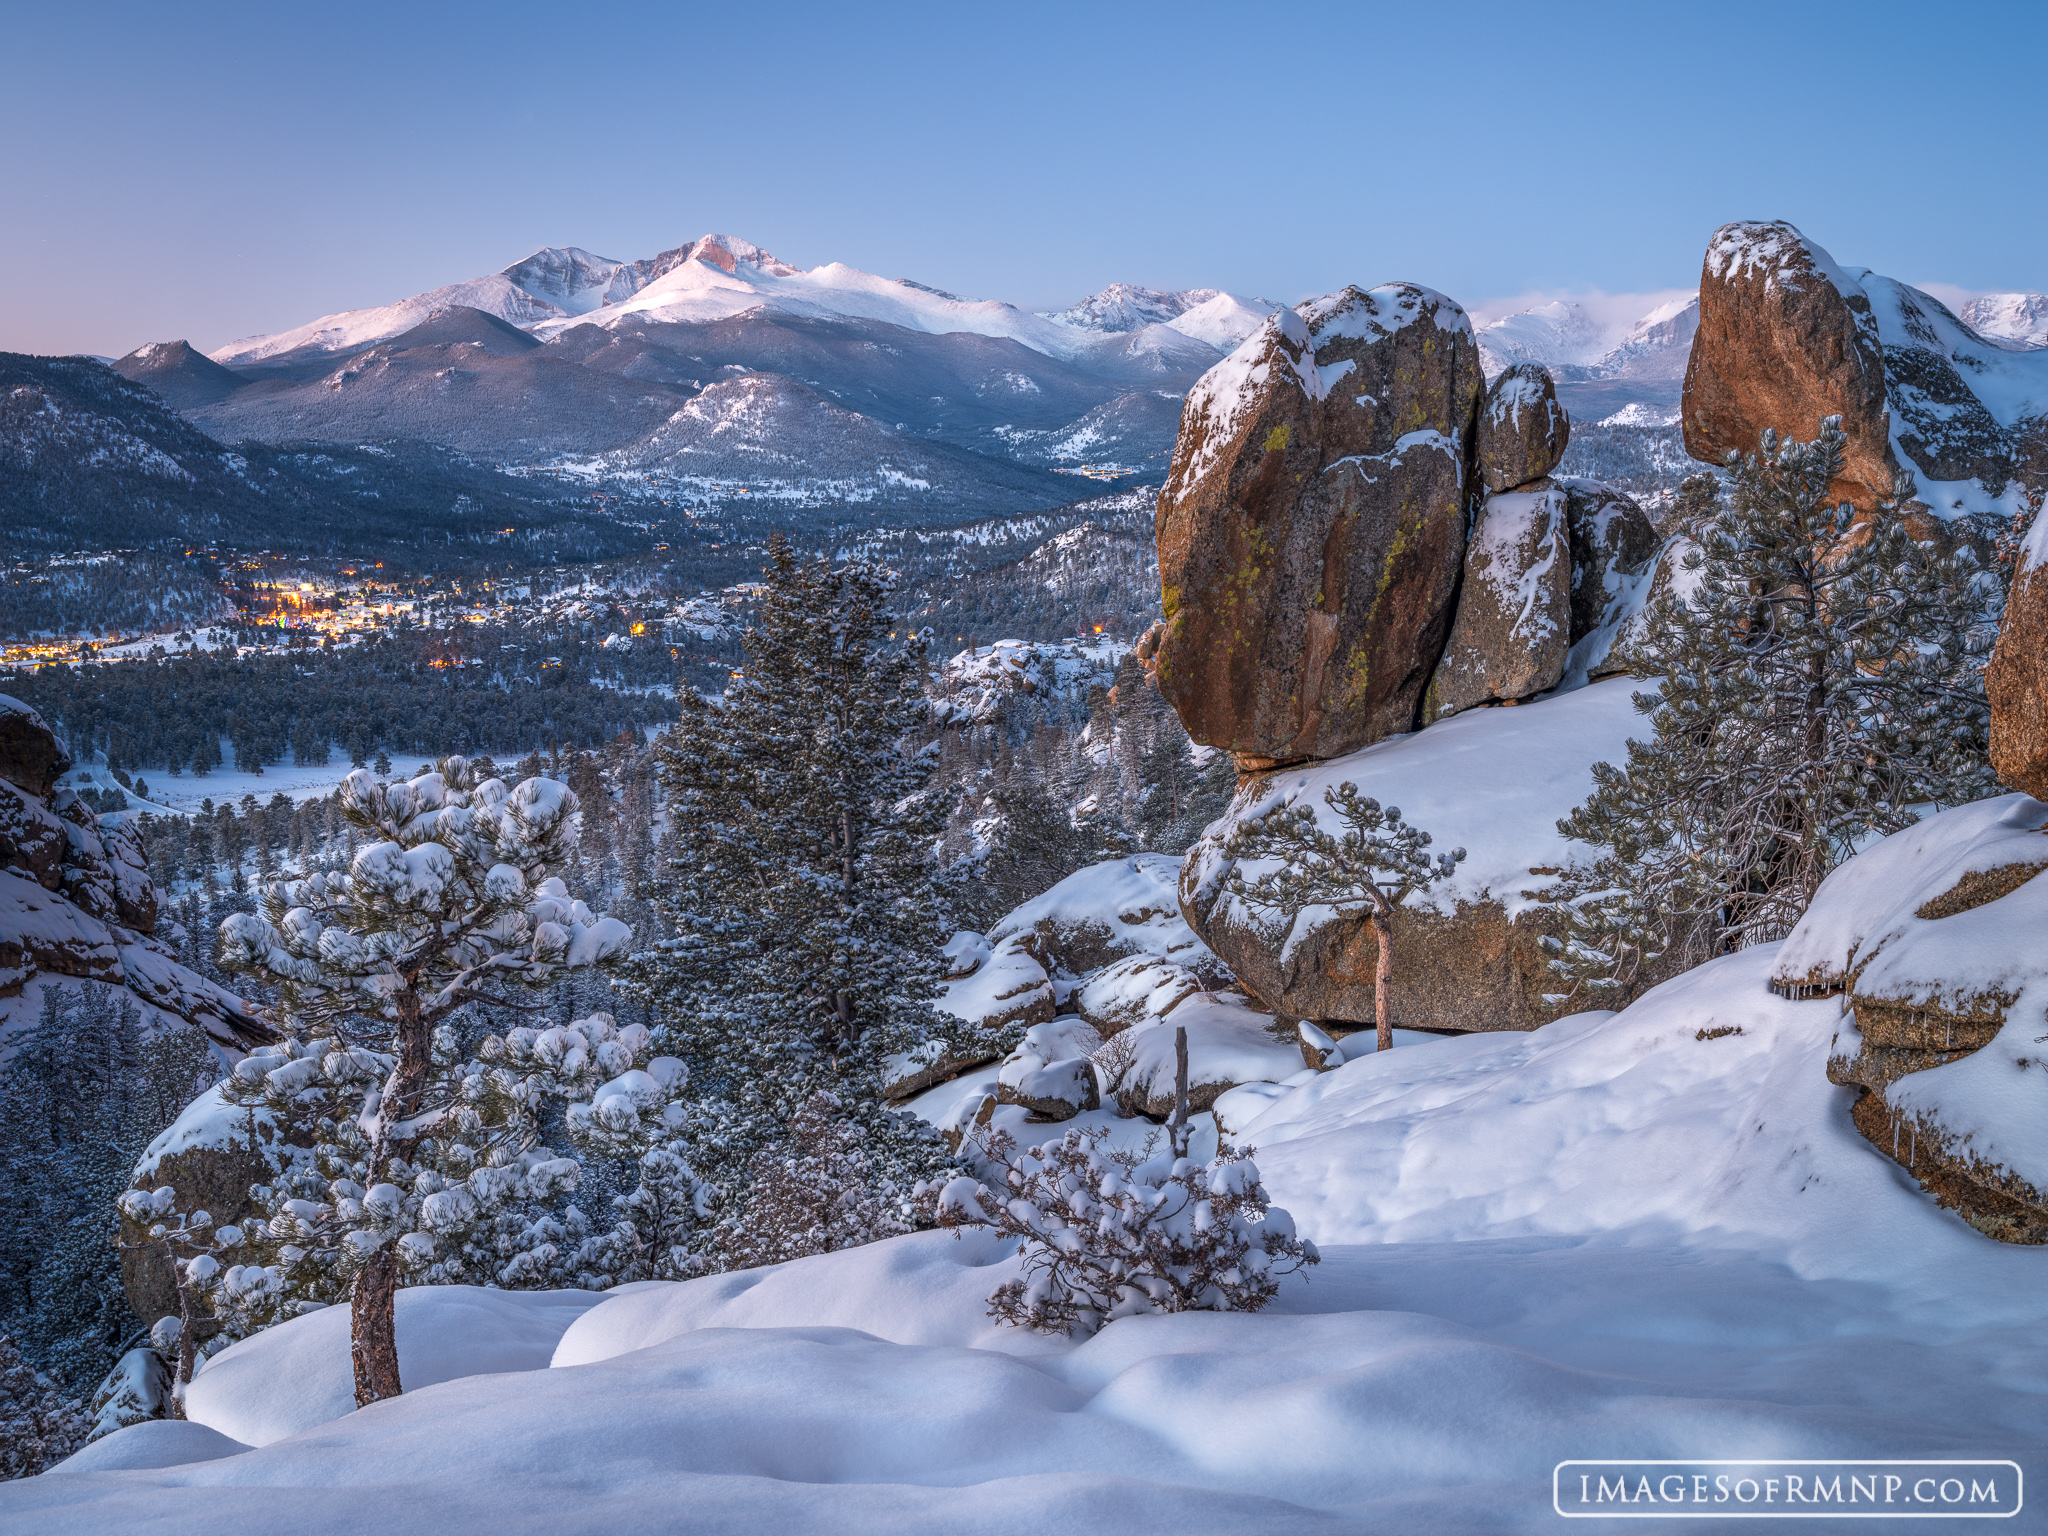 Last night’s winter storm blanketed the earth with fresh snow. As this new day dawns, the lights of Estes Park, Colorado can...